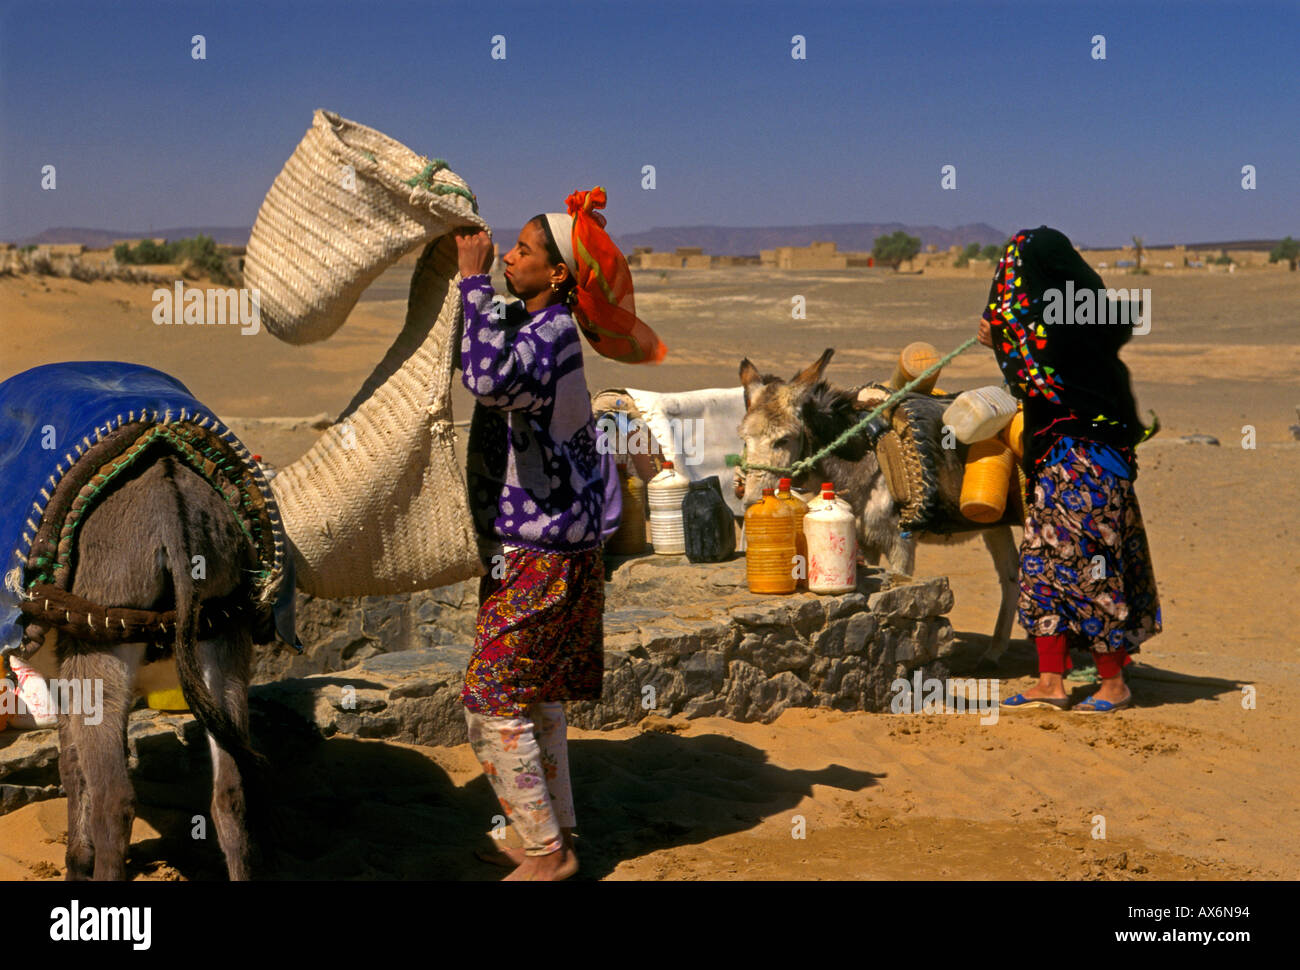 Moroccans, Berbers, girl drawing water from well, town of Merzouga, Merzouga, Errachidia Province, Morocco, Africa Stock Photo